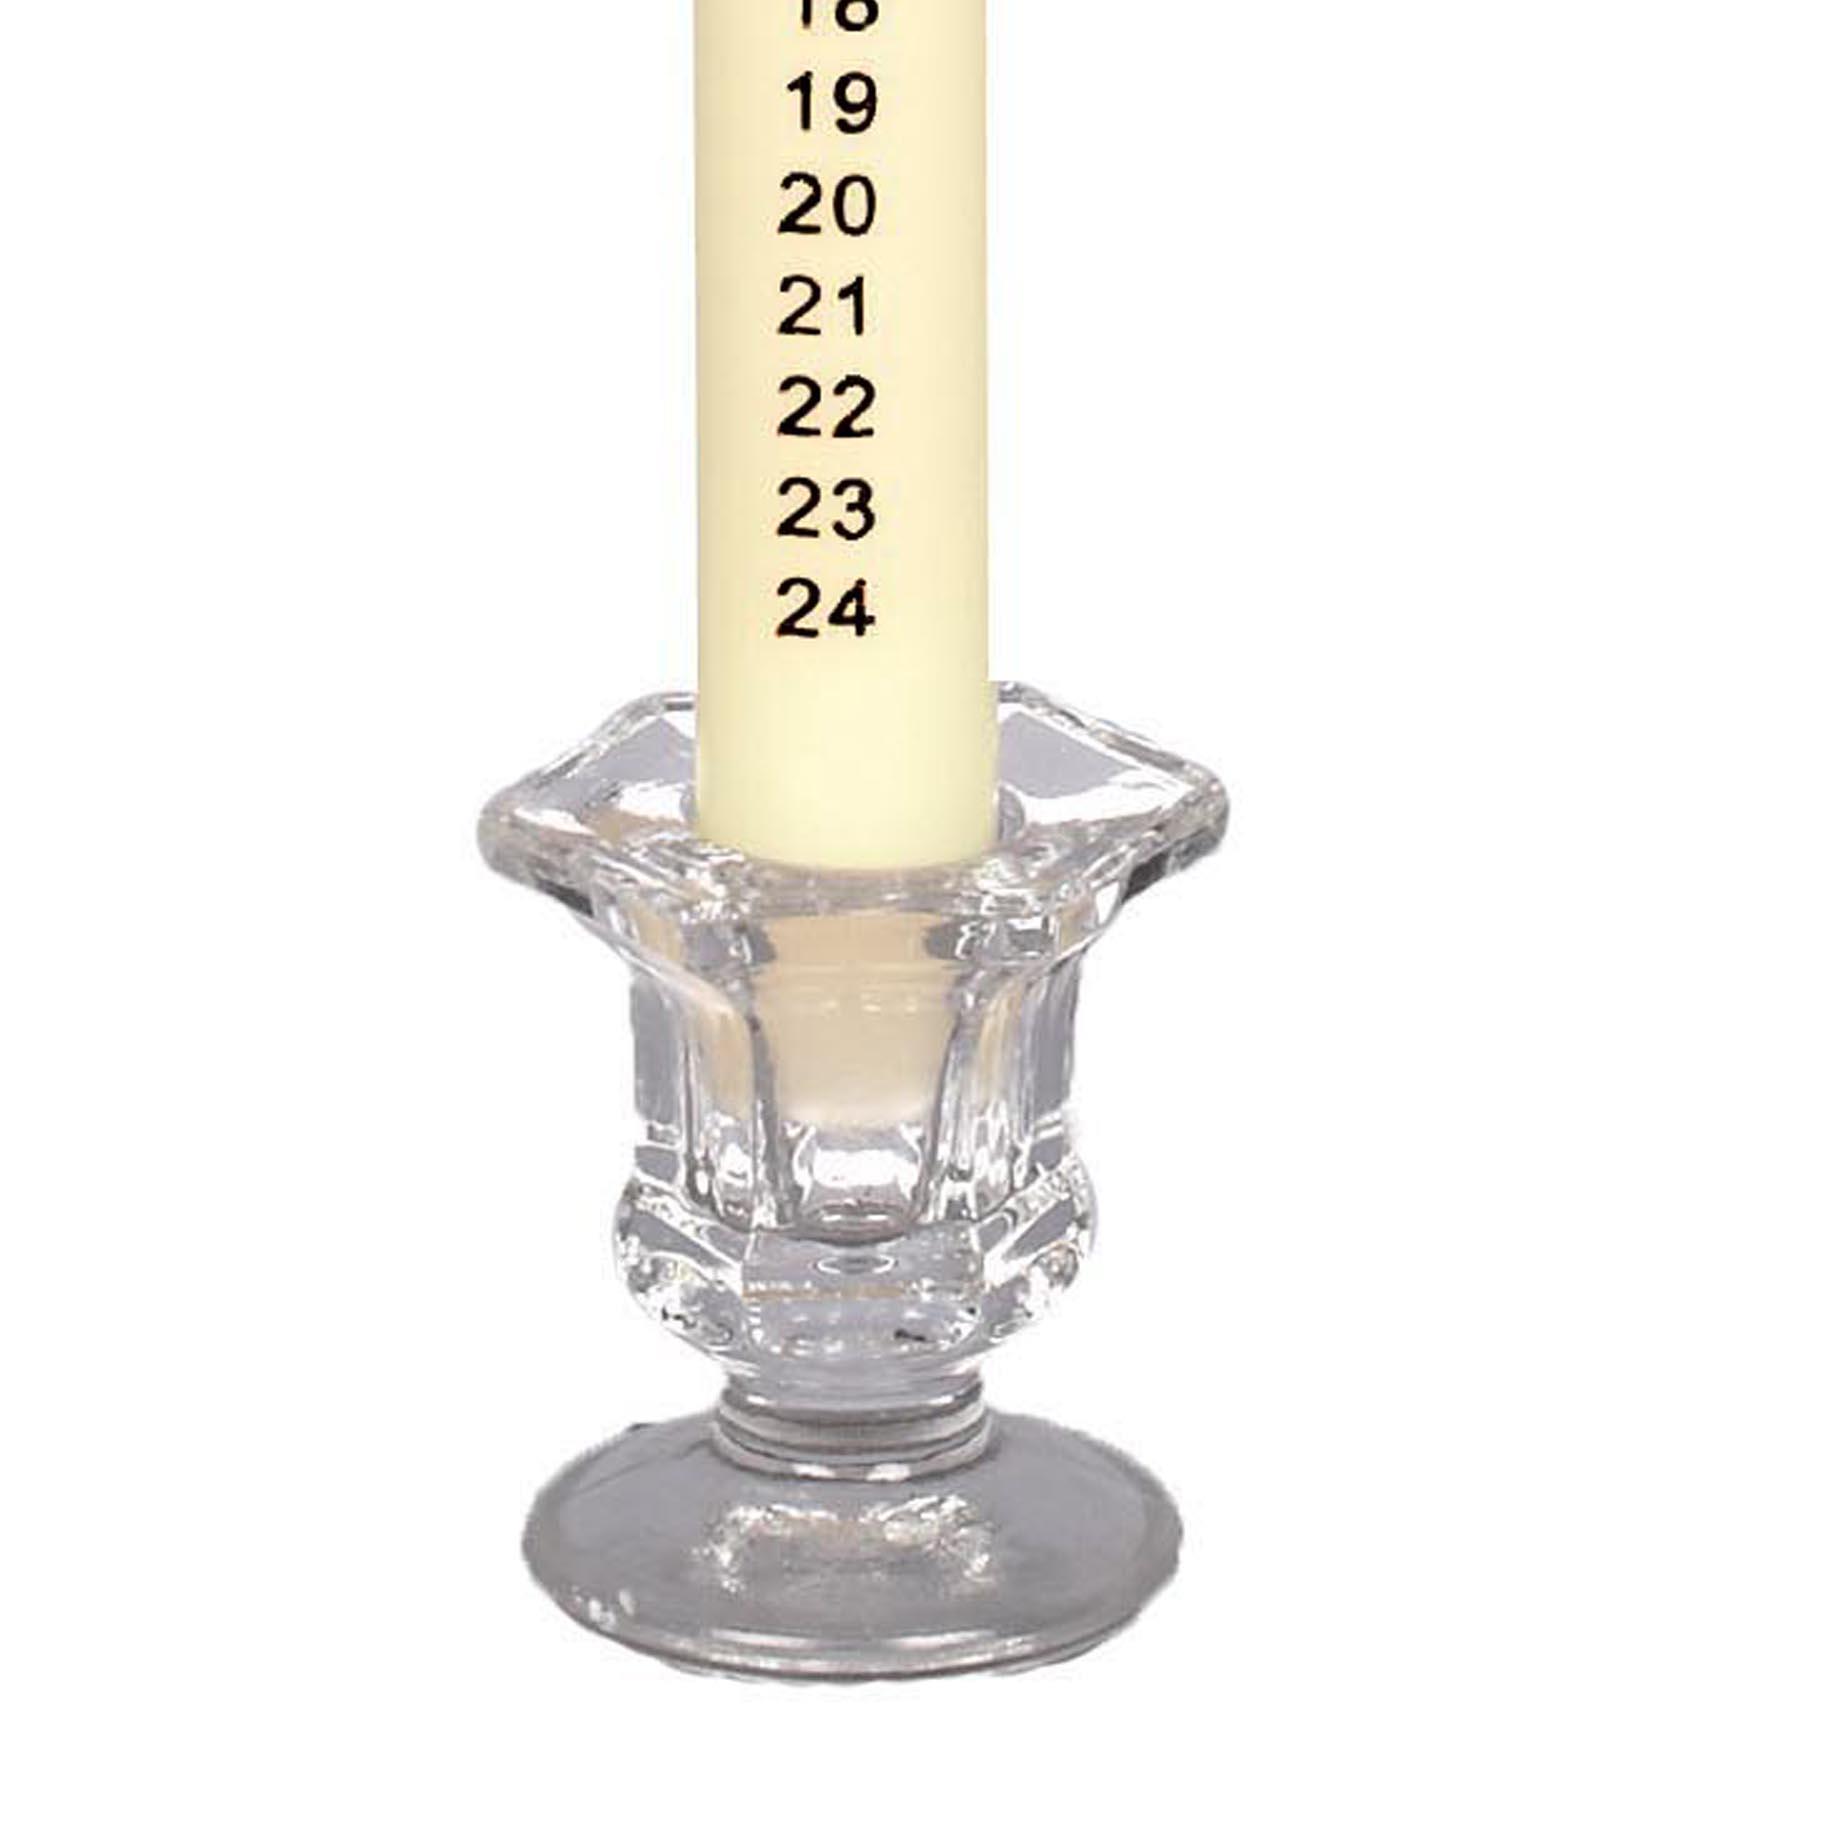 25cm Countdown to Christmas Advent Candle in Clear Glass Holder - Ivory